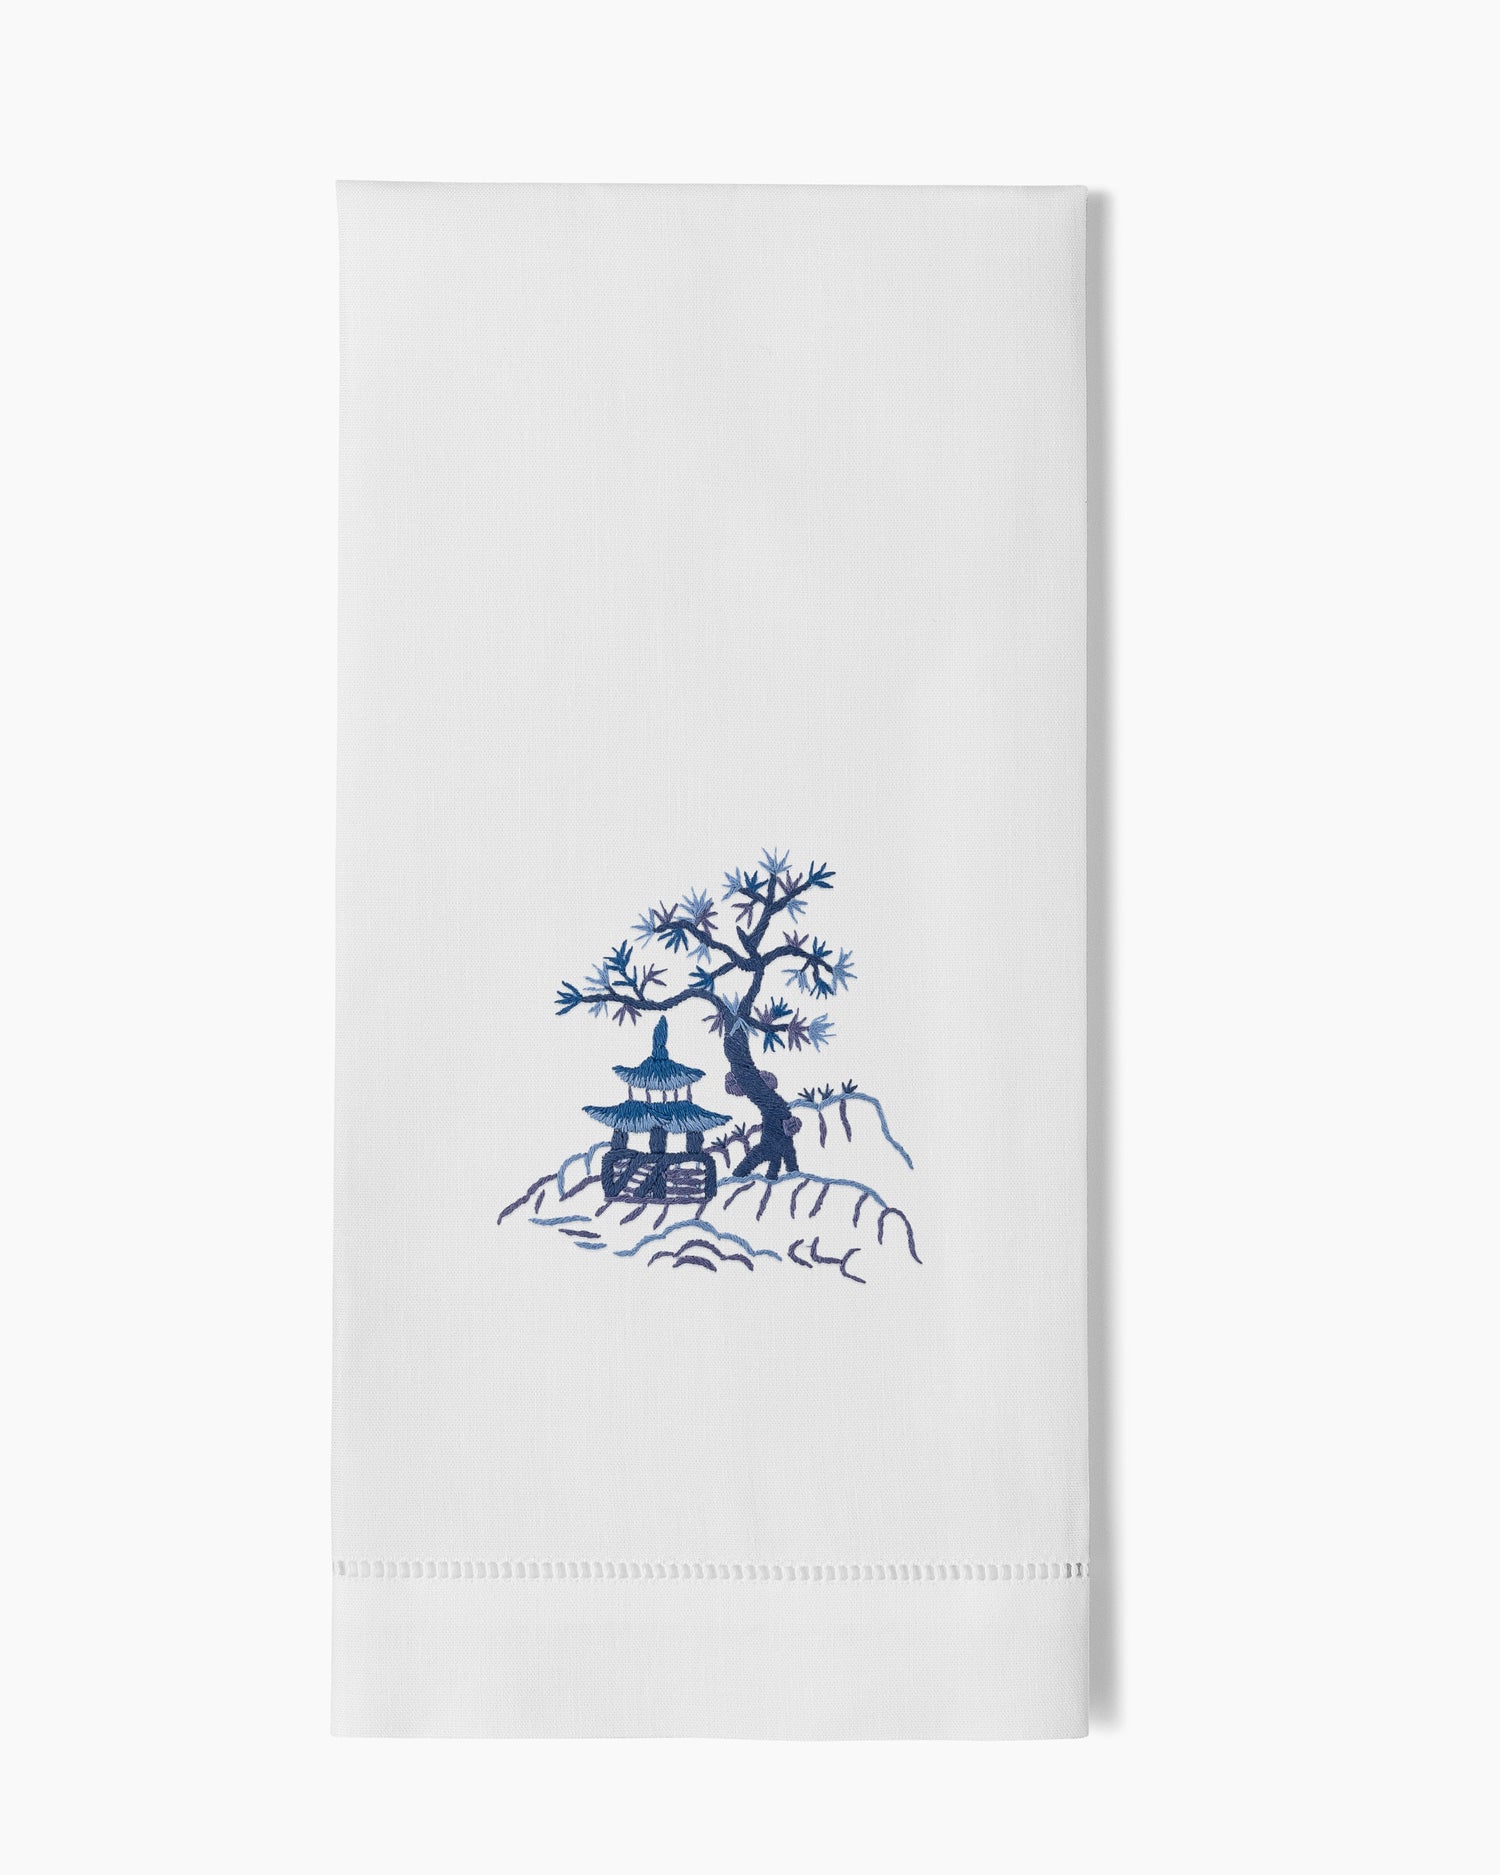 A Canton Blue Hand Towel with a blue tree on it, made by Henry Handwork.